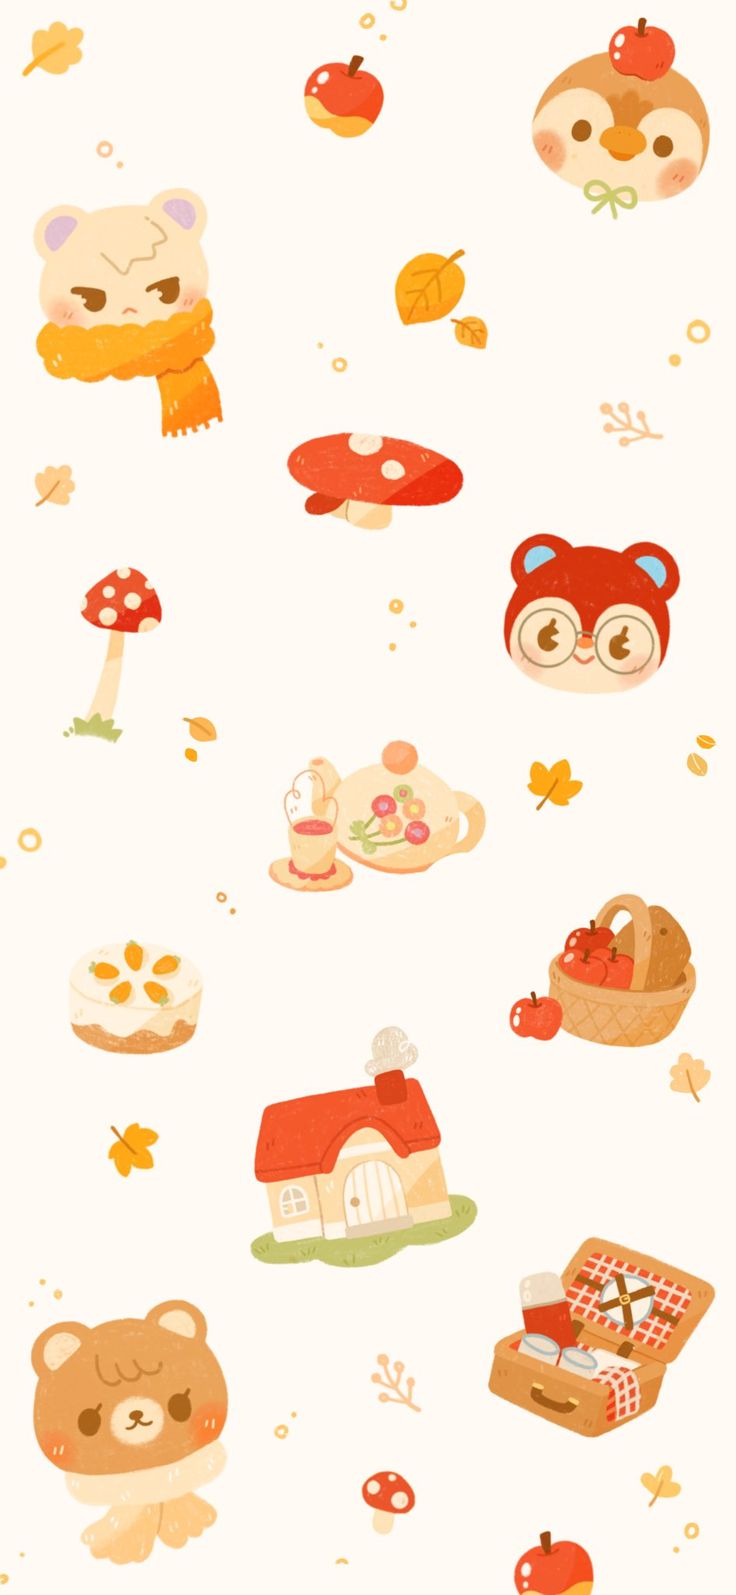 A cute wallpaper with illustrations of animals, food, and a house. - Animal Crossing